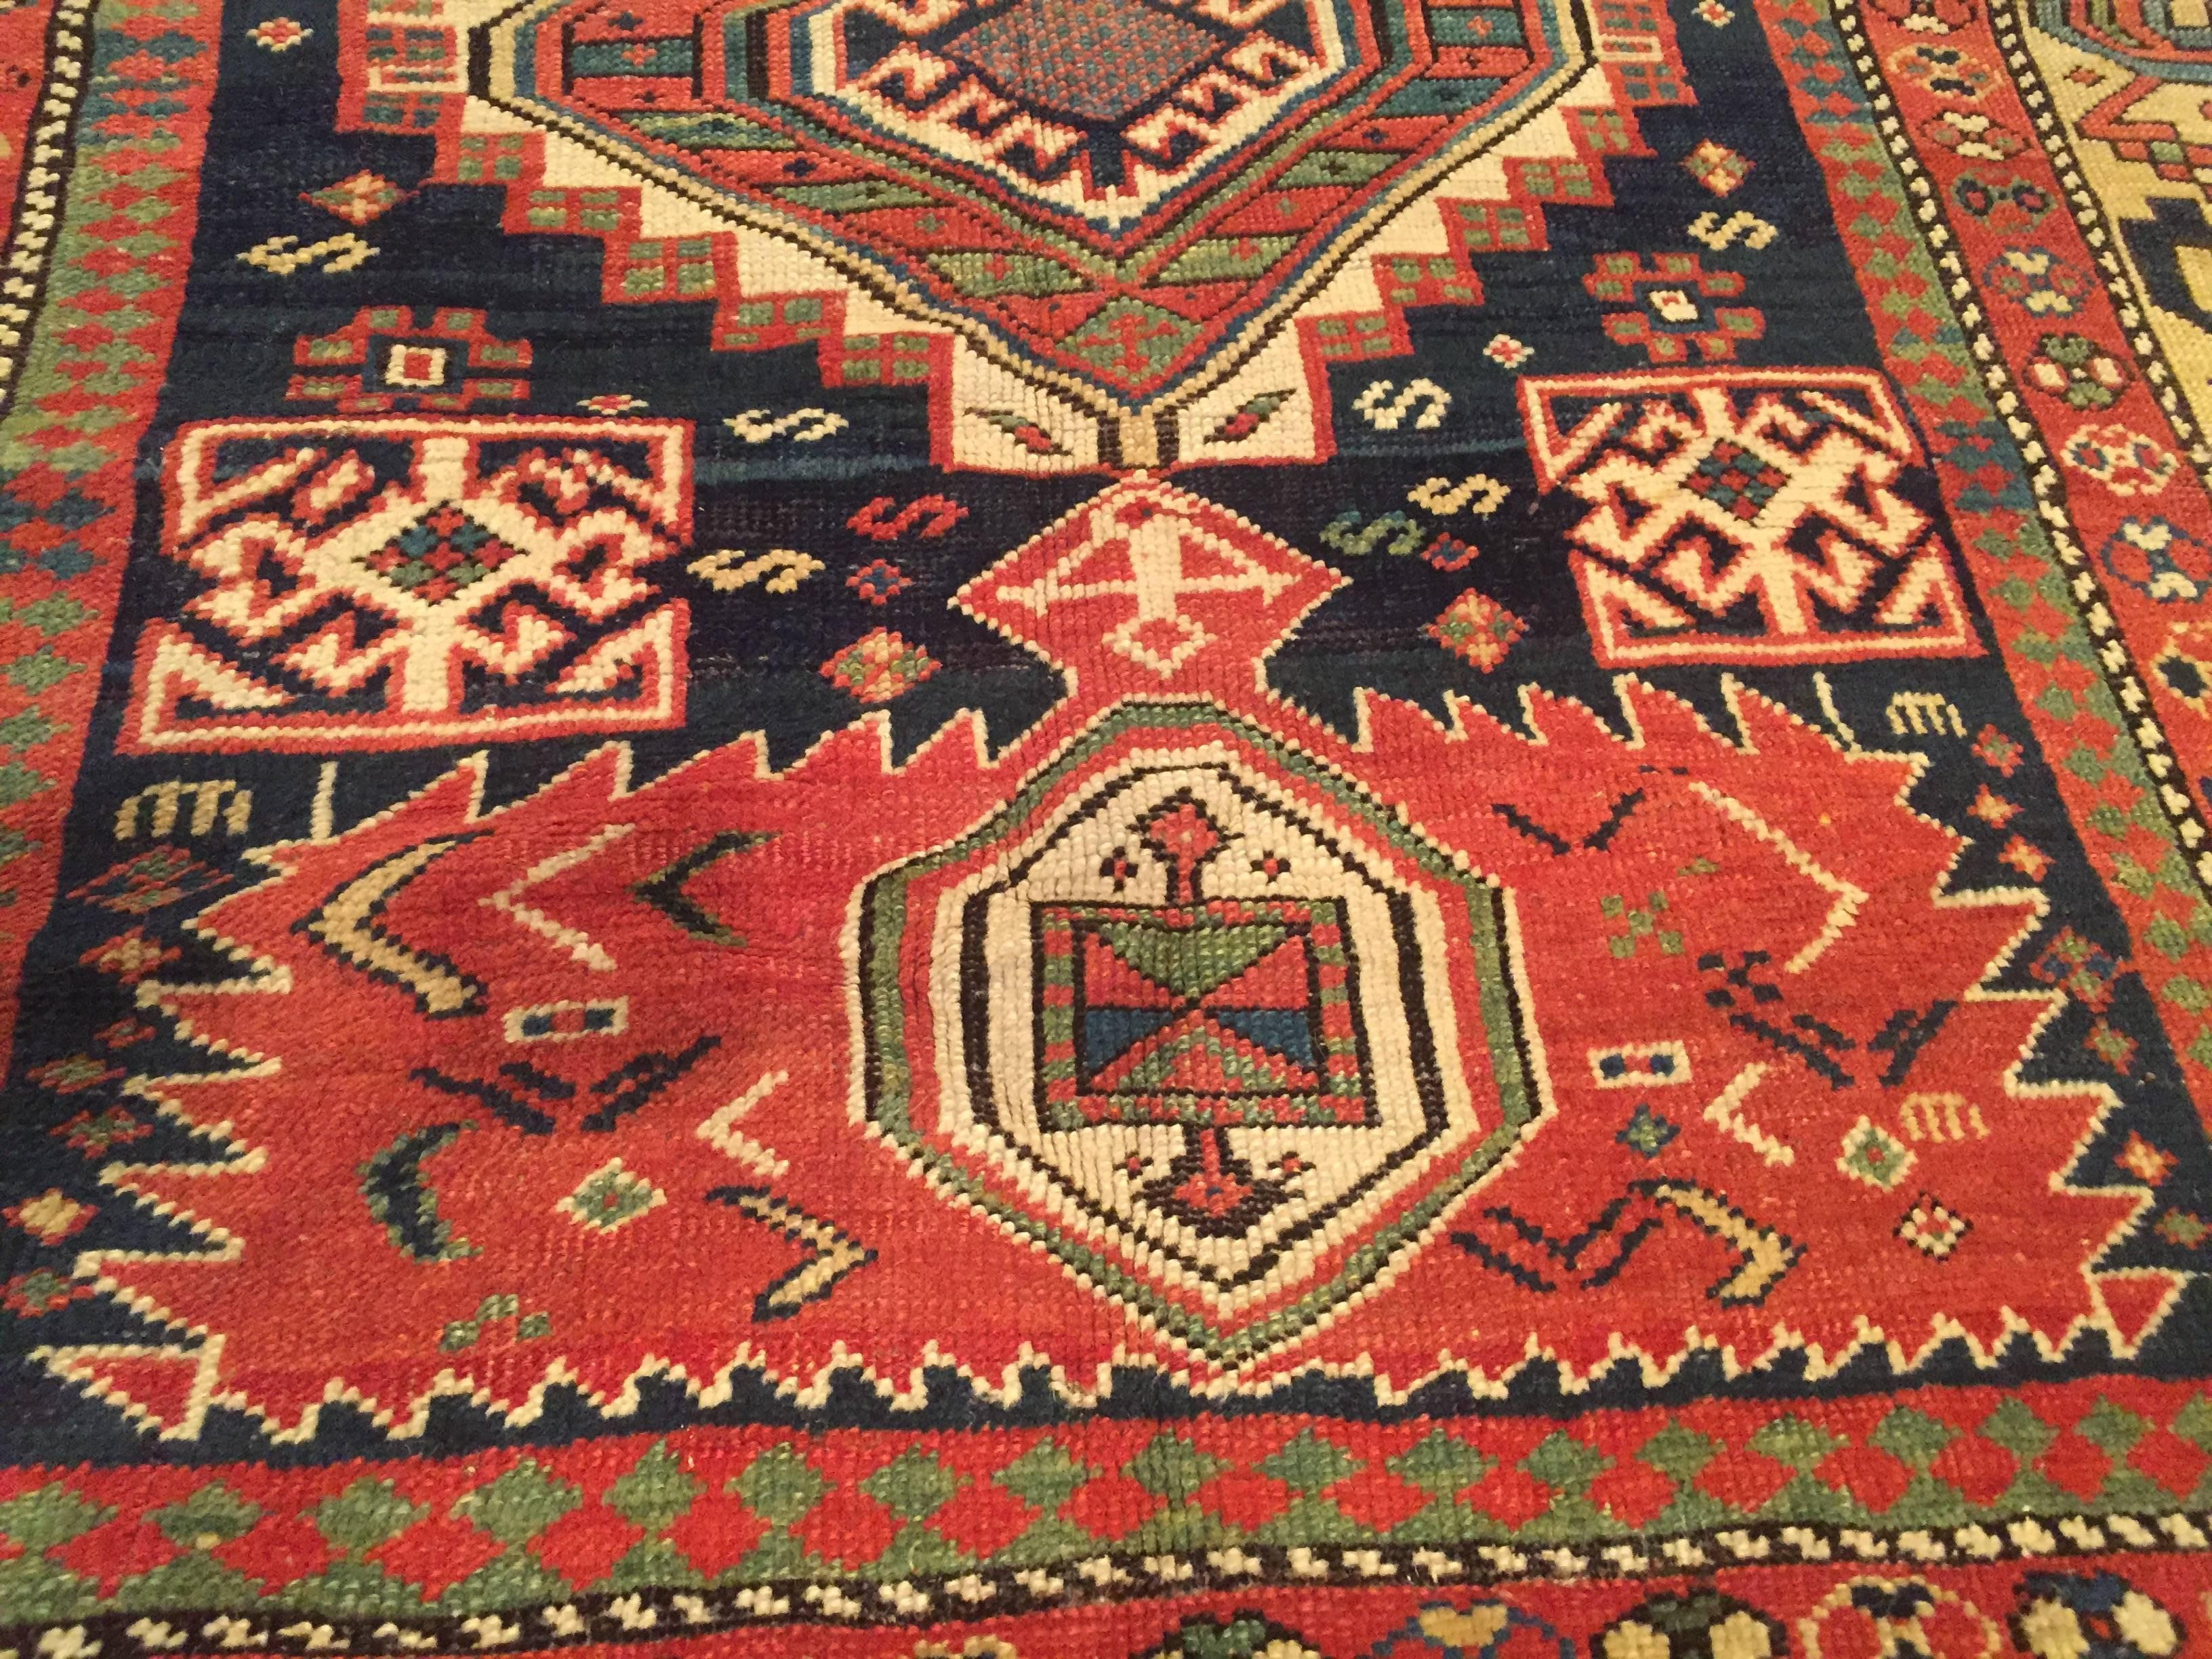 Late 19th Century Antique Caucasian Karagashli Rug In Good Condition For Sale In Louisville, KY